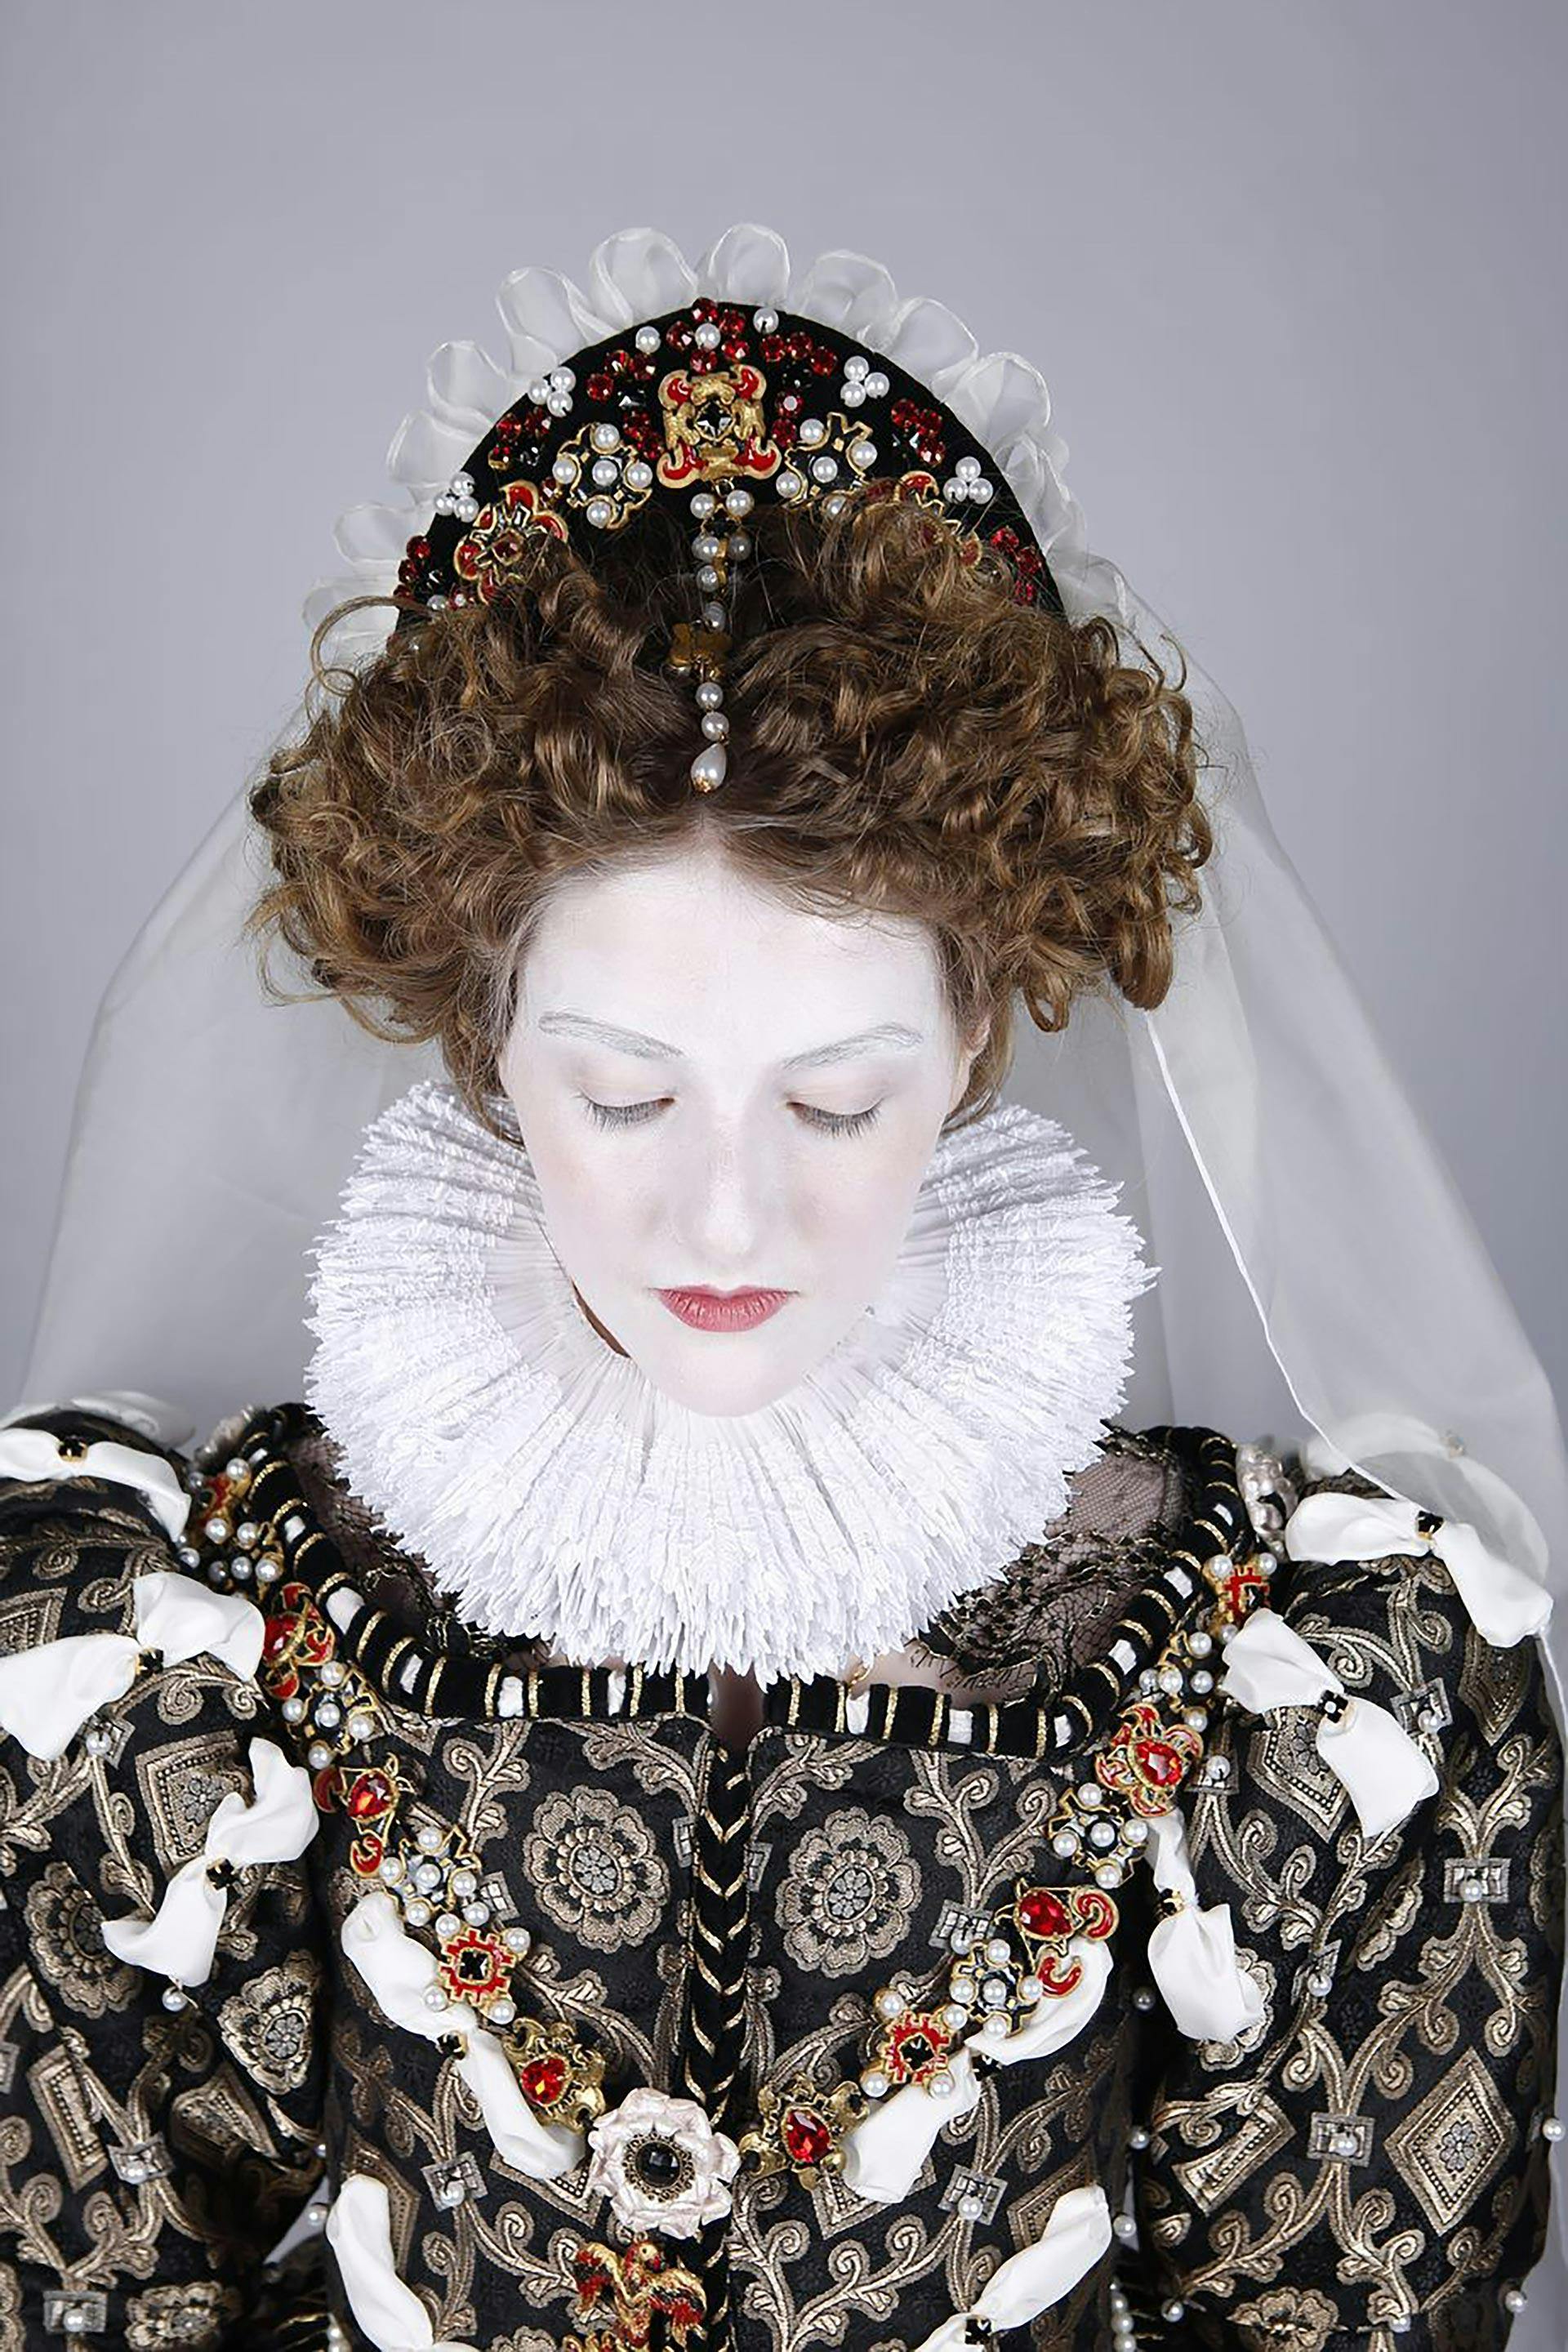 A person in Elizabethan-style costume looking down towards the floor.